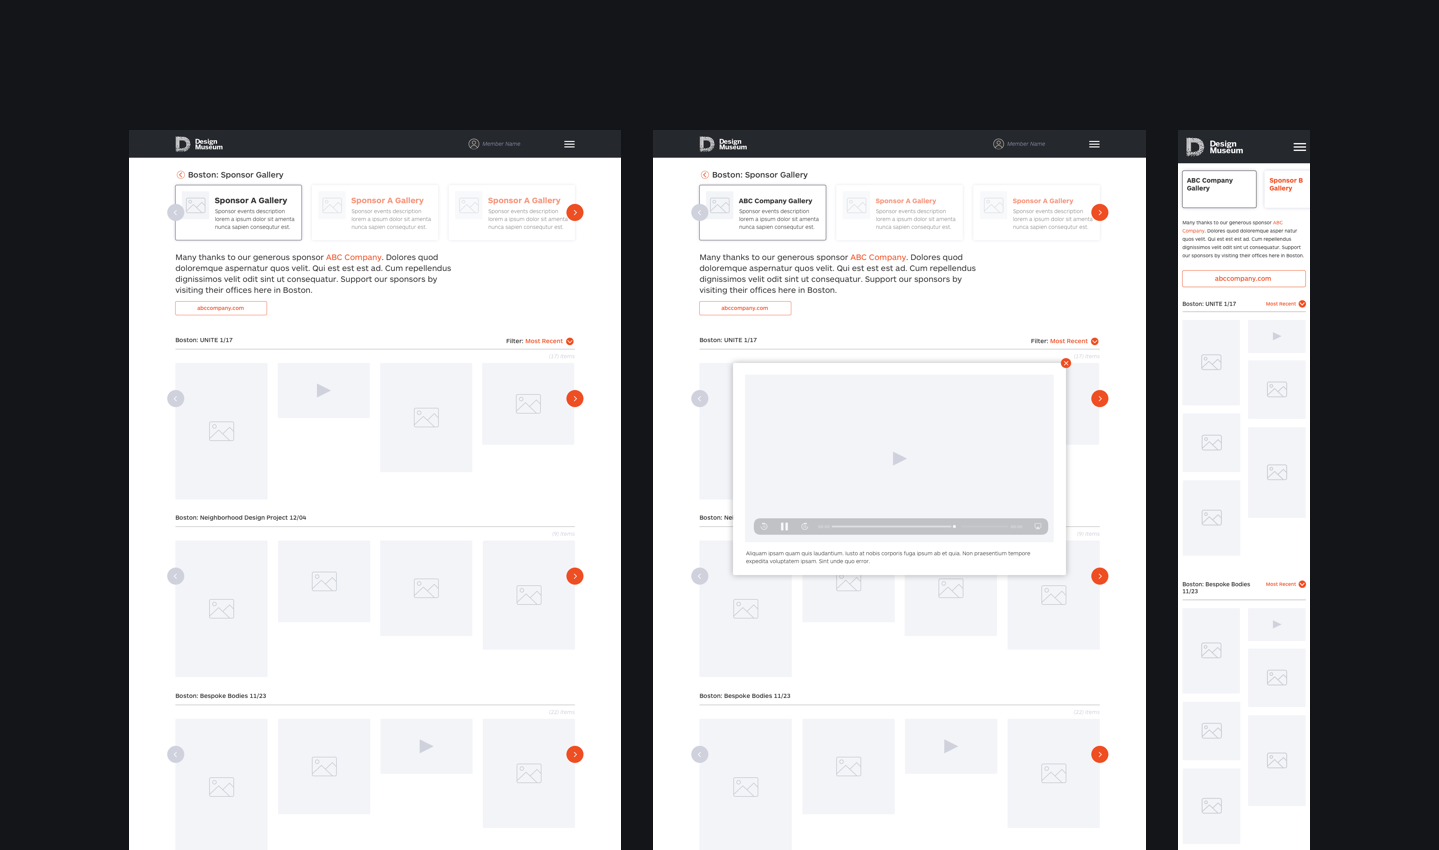 Layout wireframes